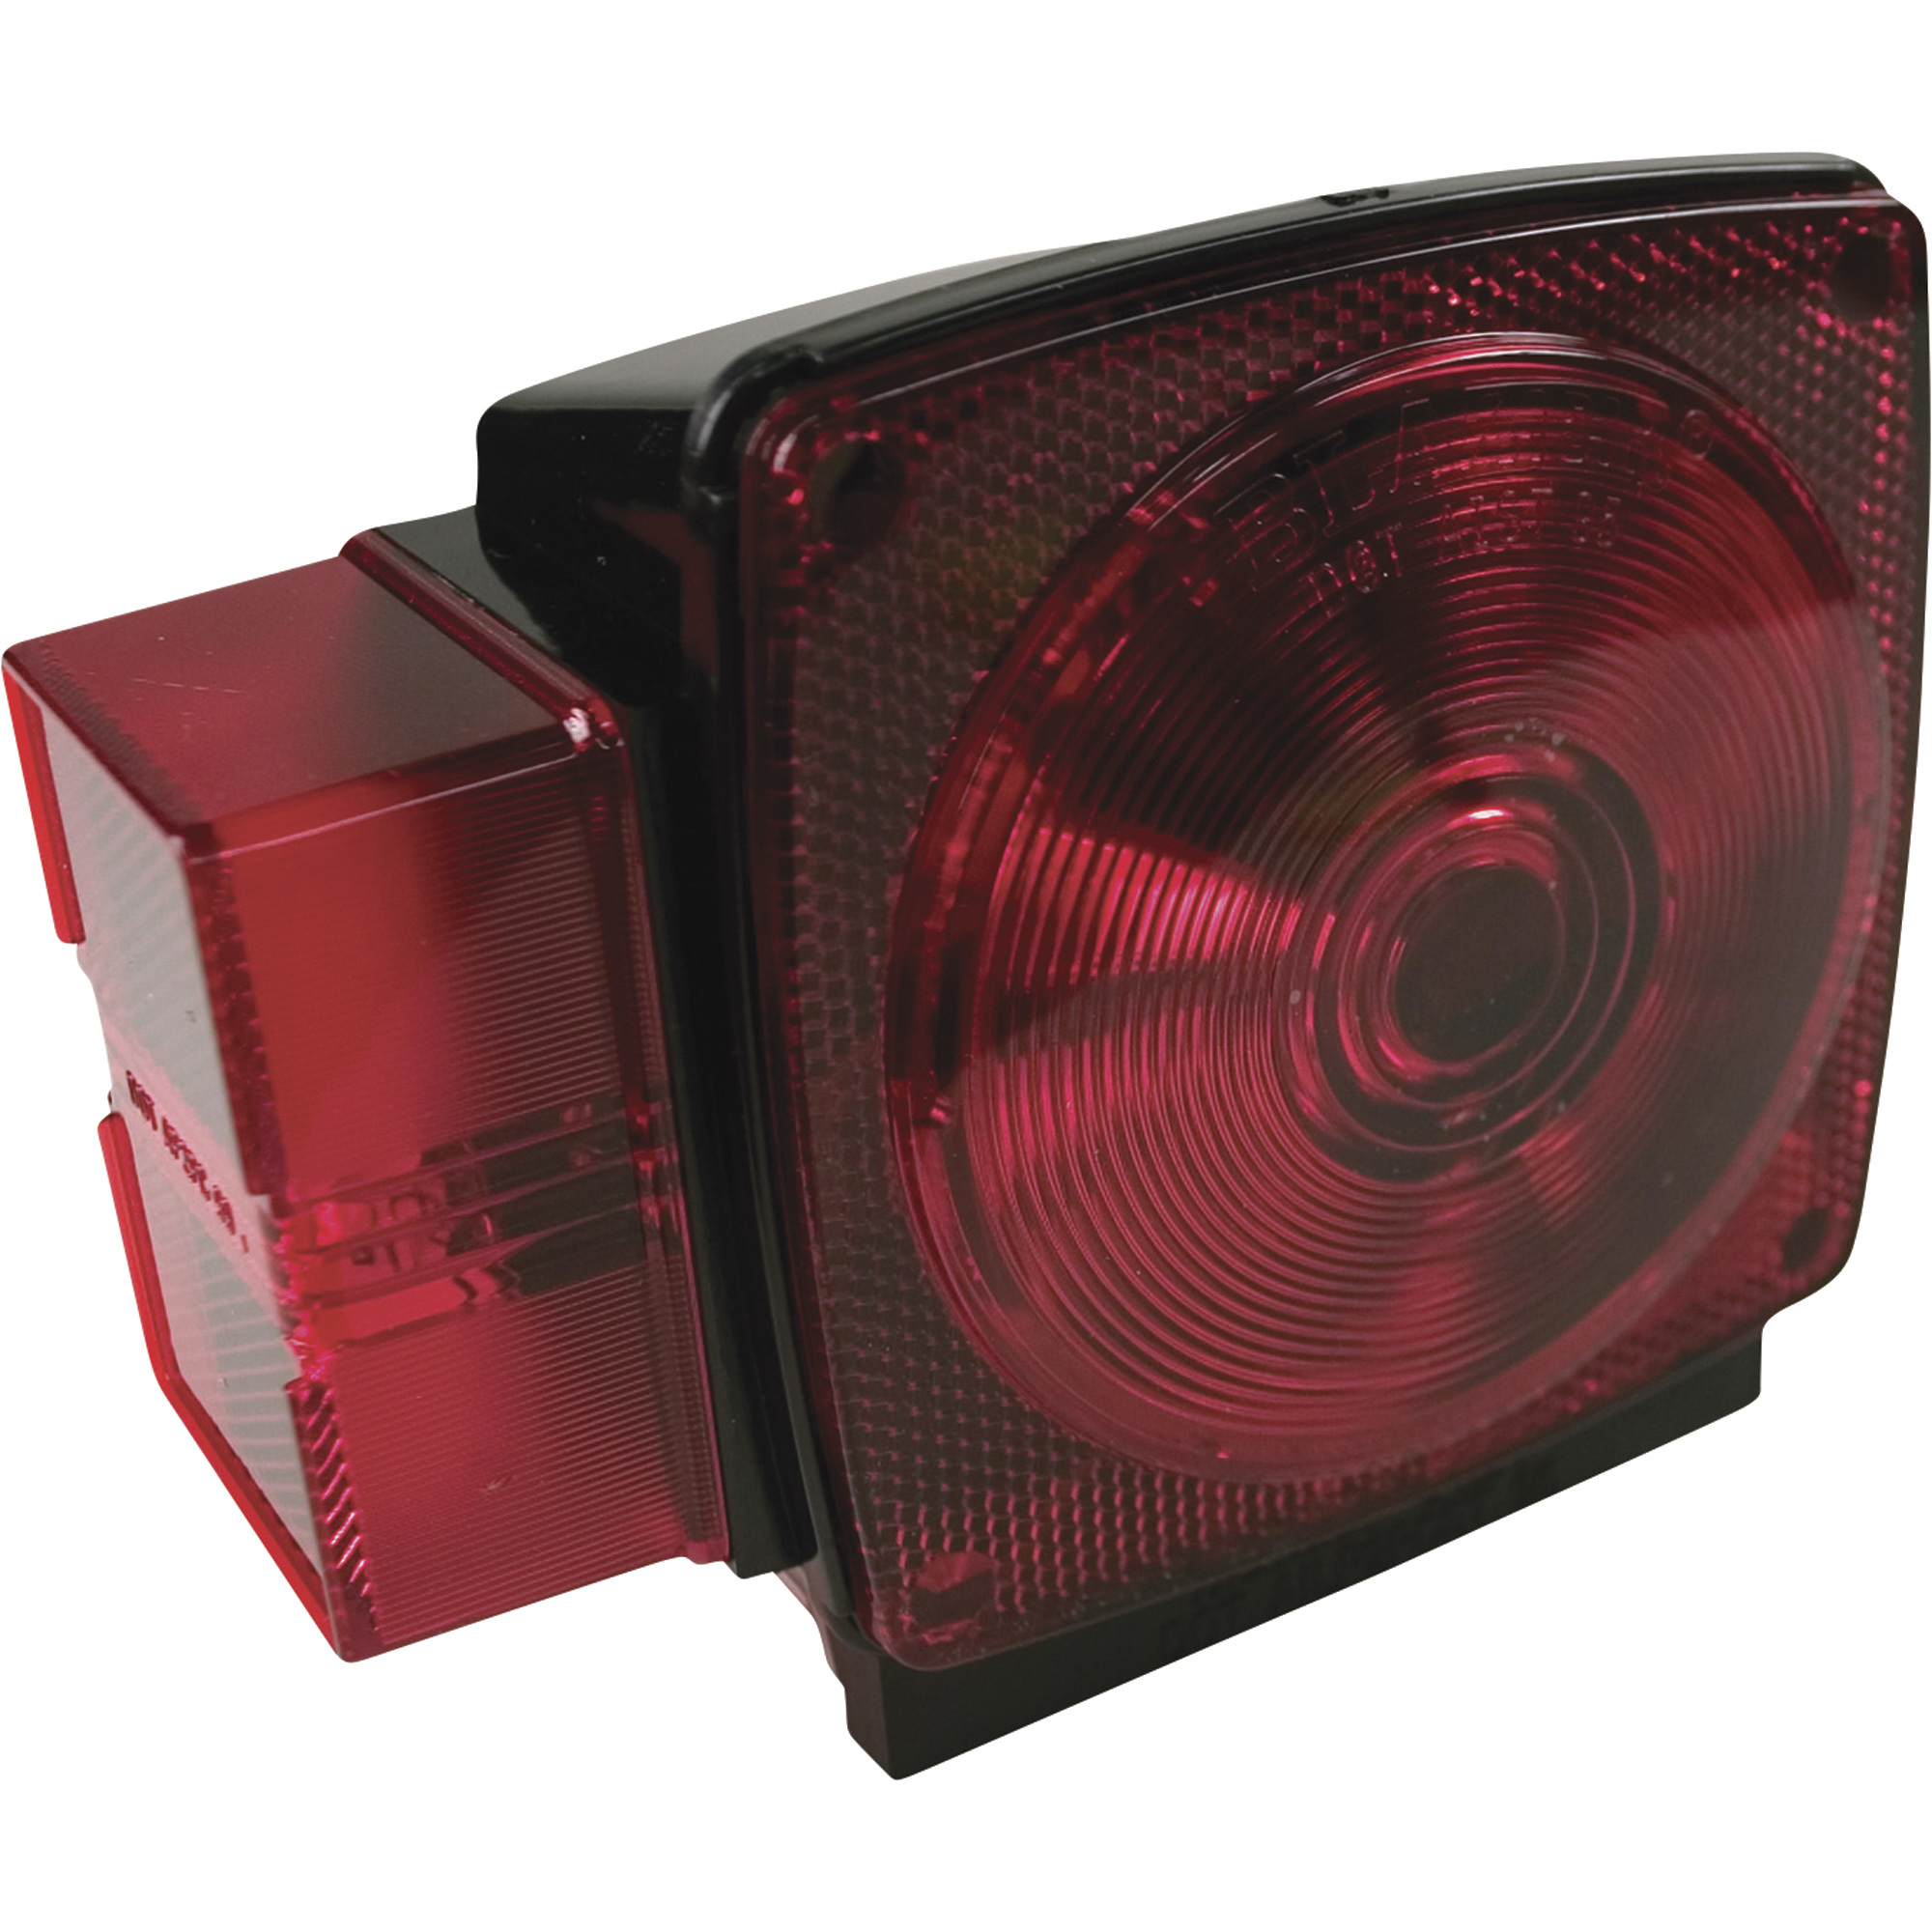 Hopkins Towing Solutions 8-Function Incandescent Stop, Turn and Tail Trailer Light â 5 3/4Inch X 5 1/4Inch, Left Hand Side, Model B84